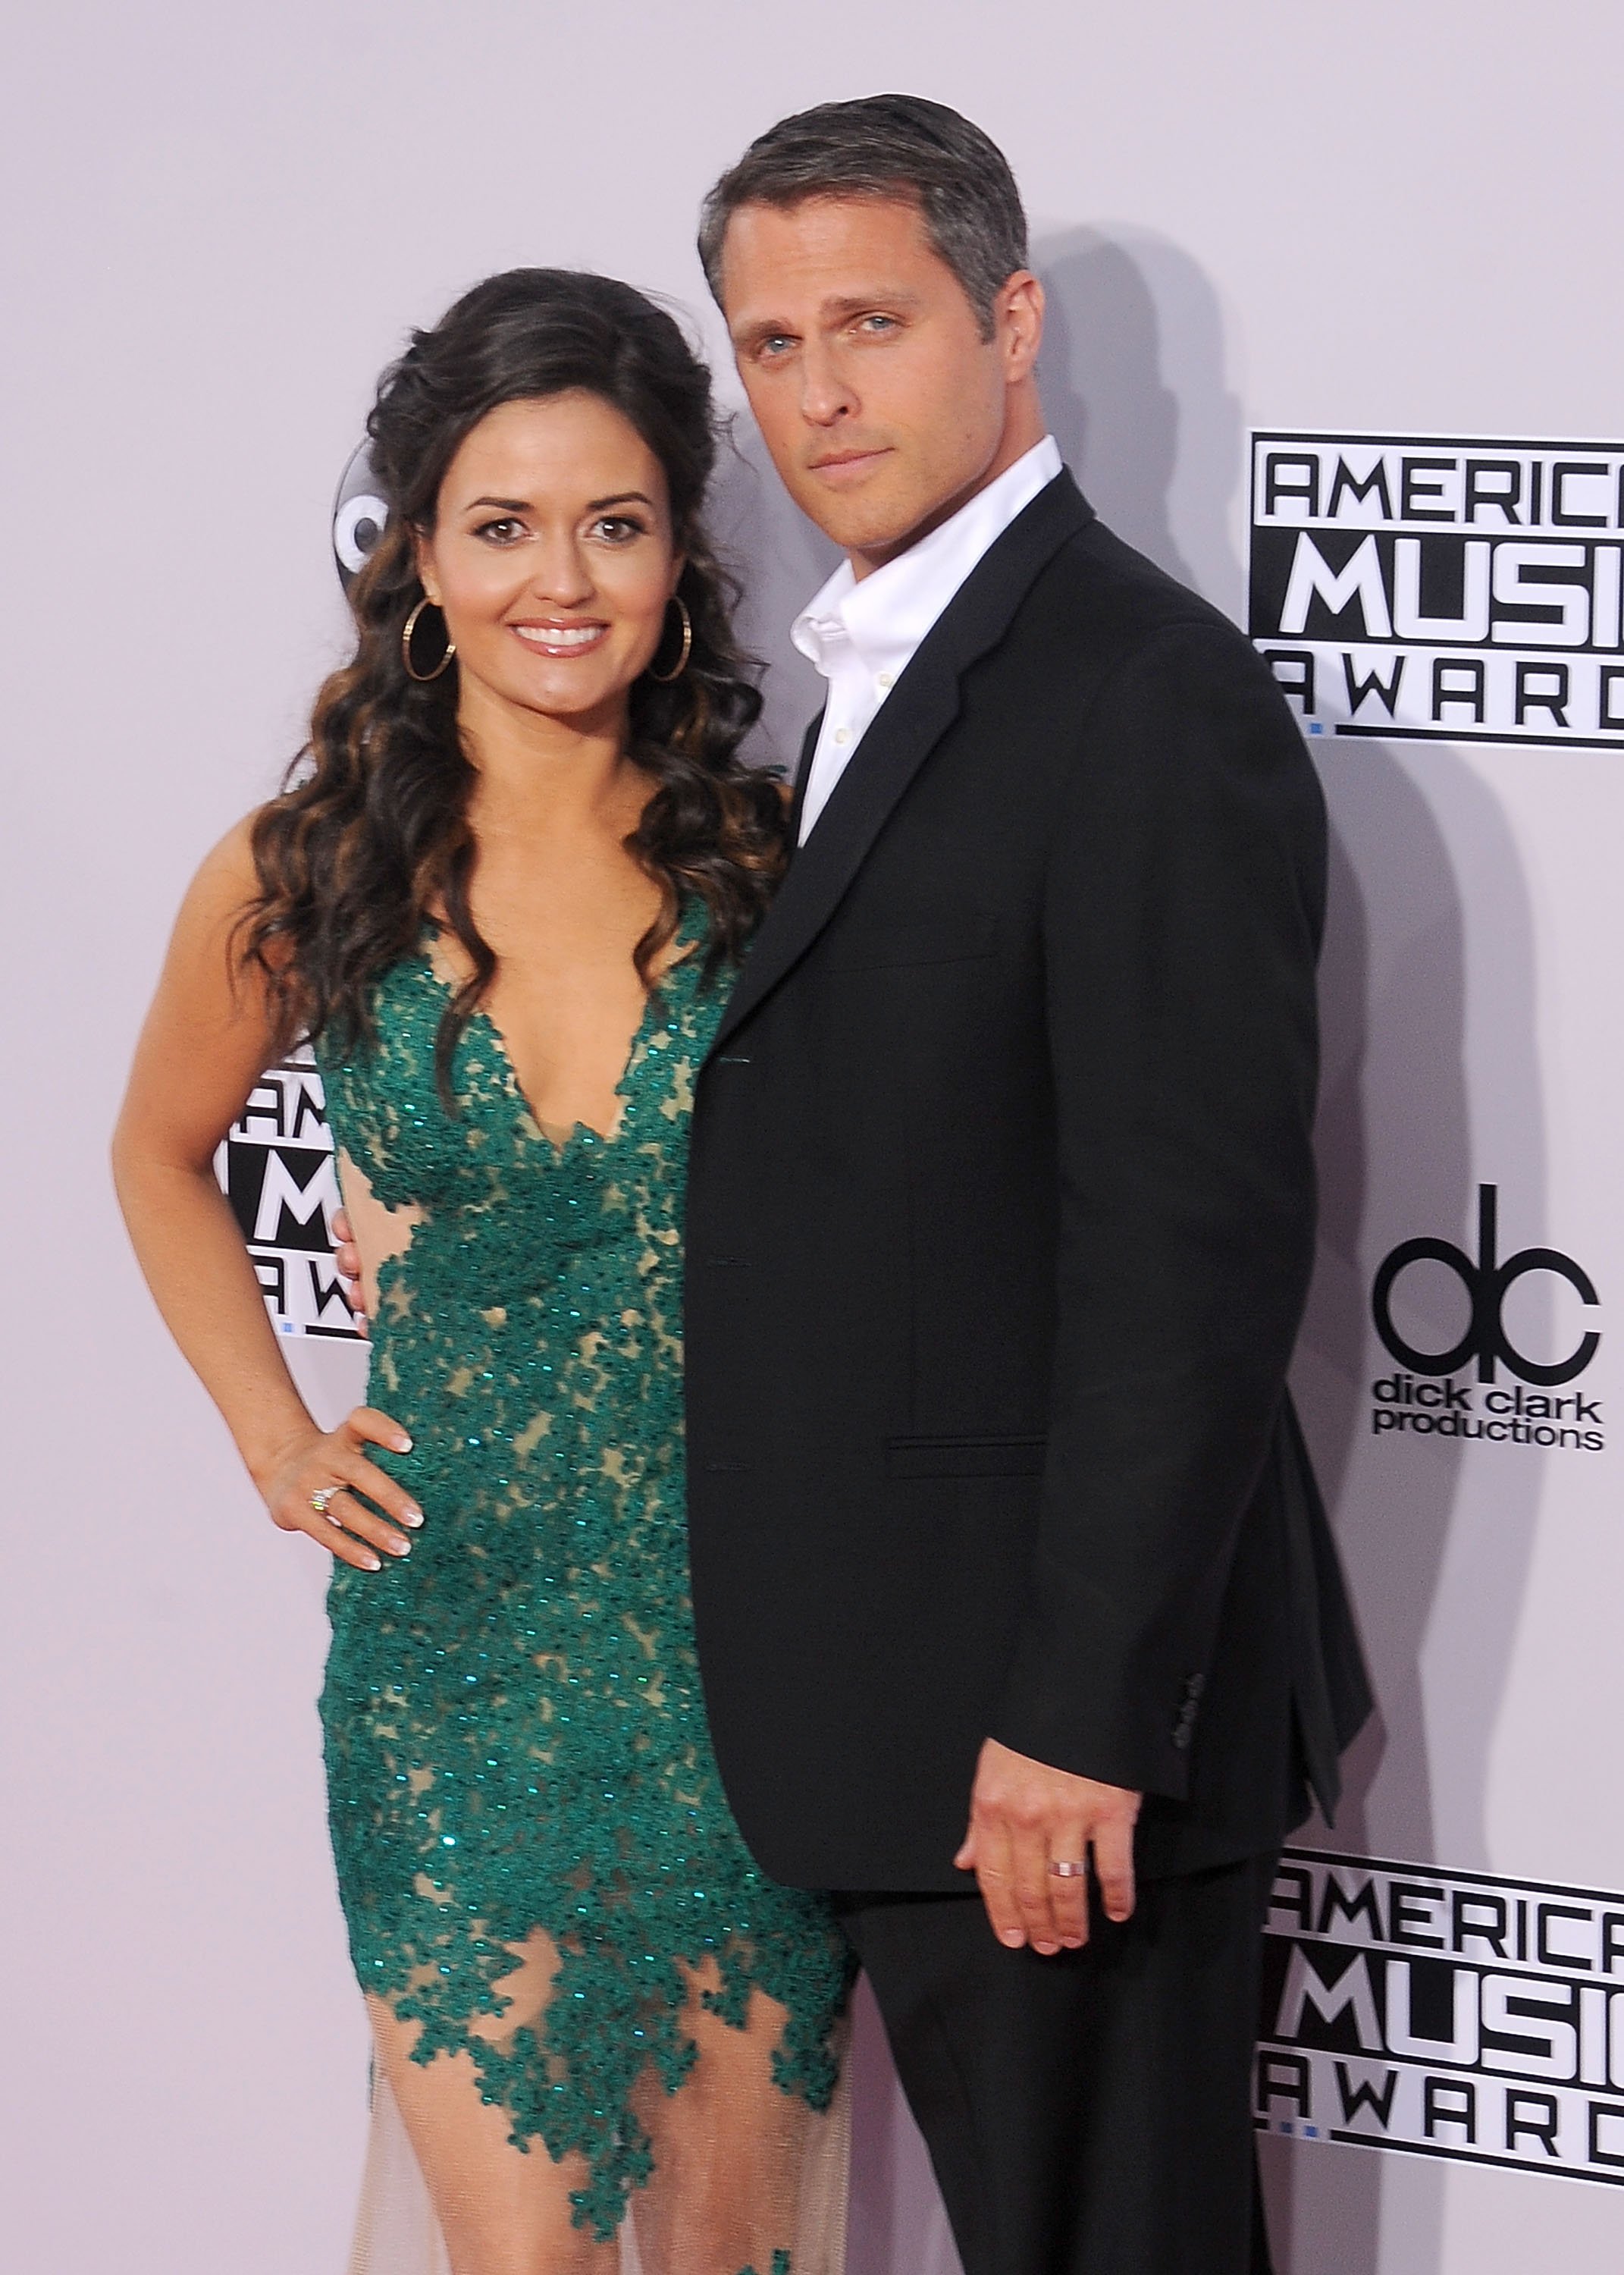 Danica McKellar and husband Scott Sveslosky arrive at the 2014 American Music Awards at Nokia Theatre L.A. Live on November 23, 2014 | Photo: GettyImages